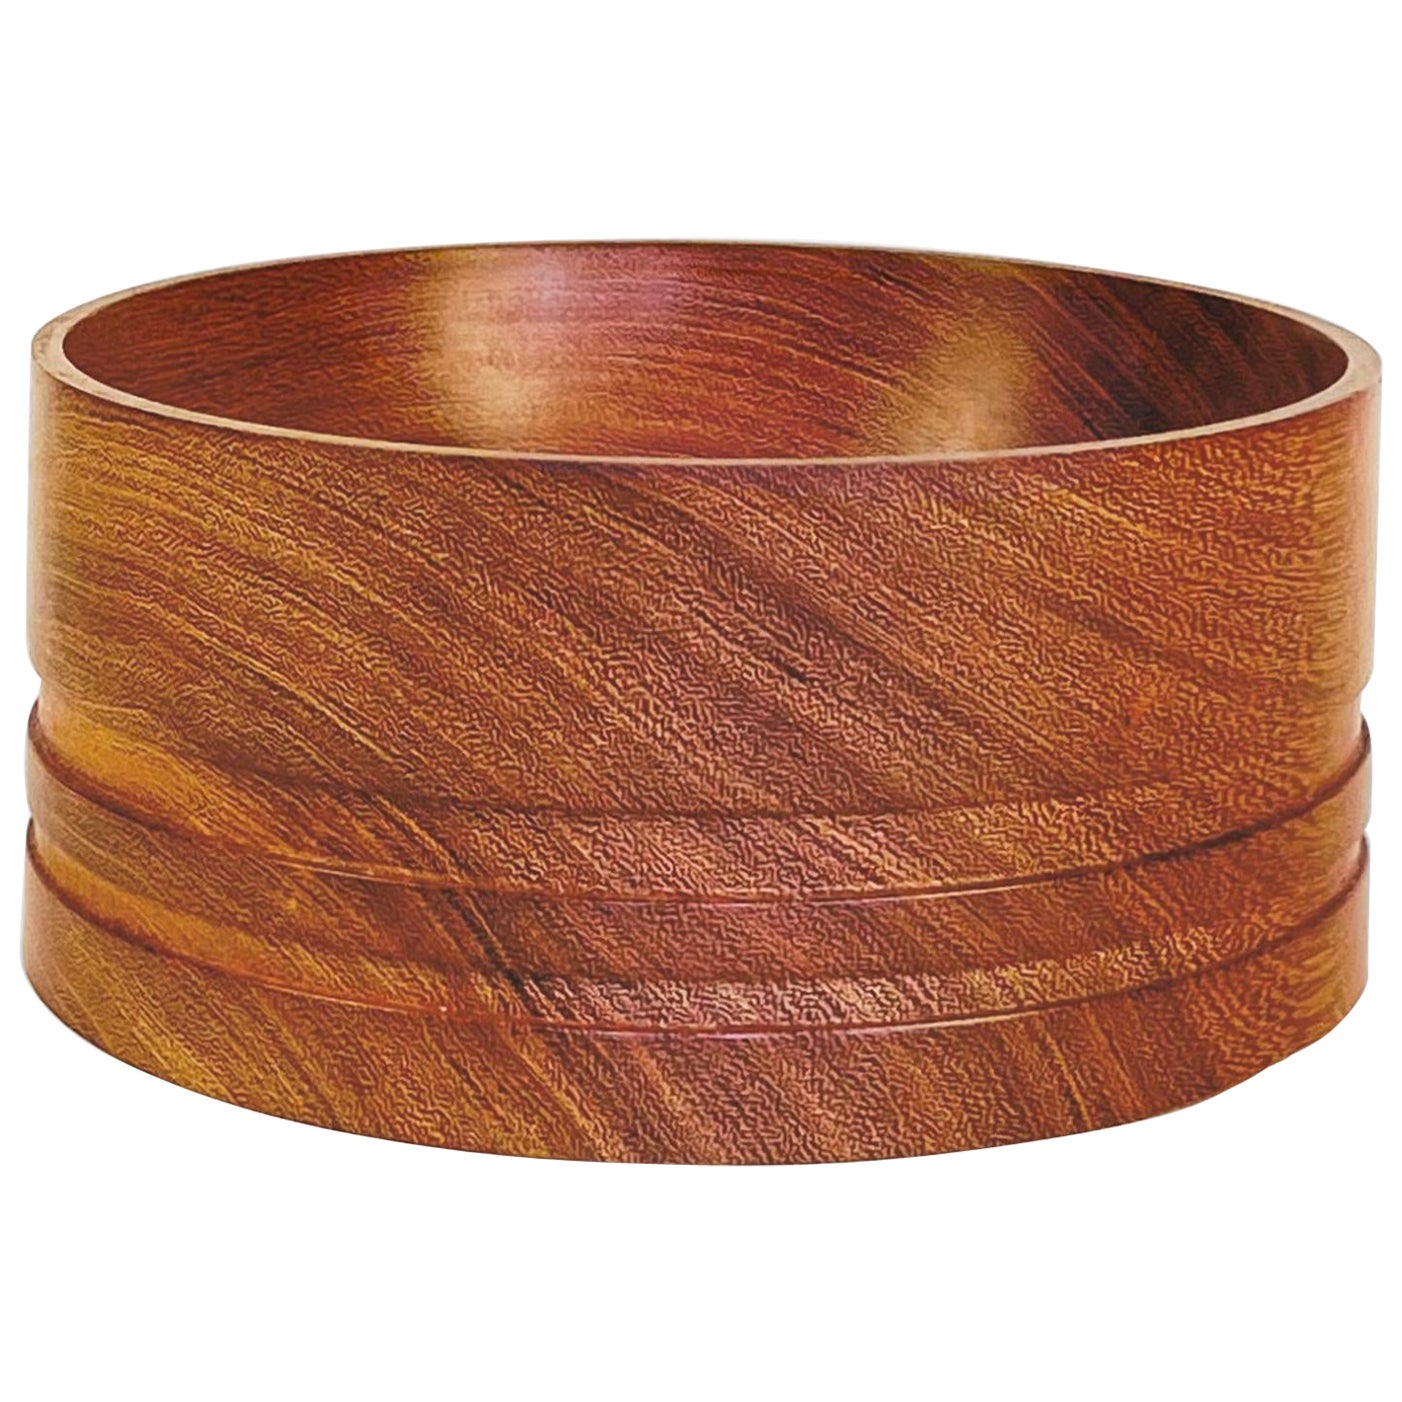 Hand Turned Wooden Bowl by Alta Pampa, Argentina For Sale